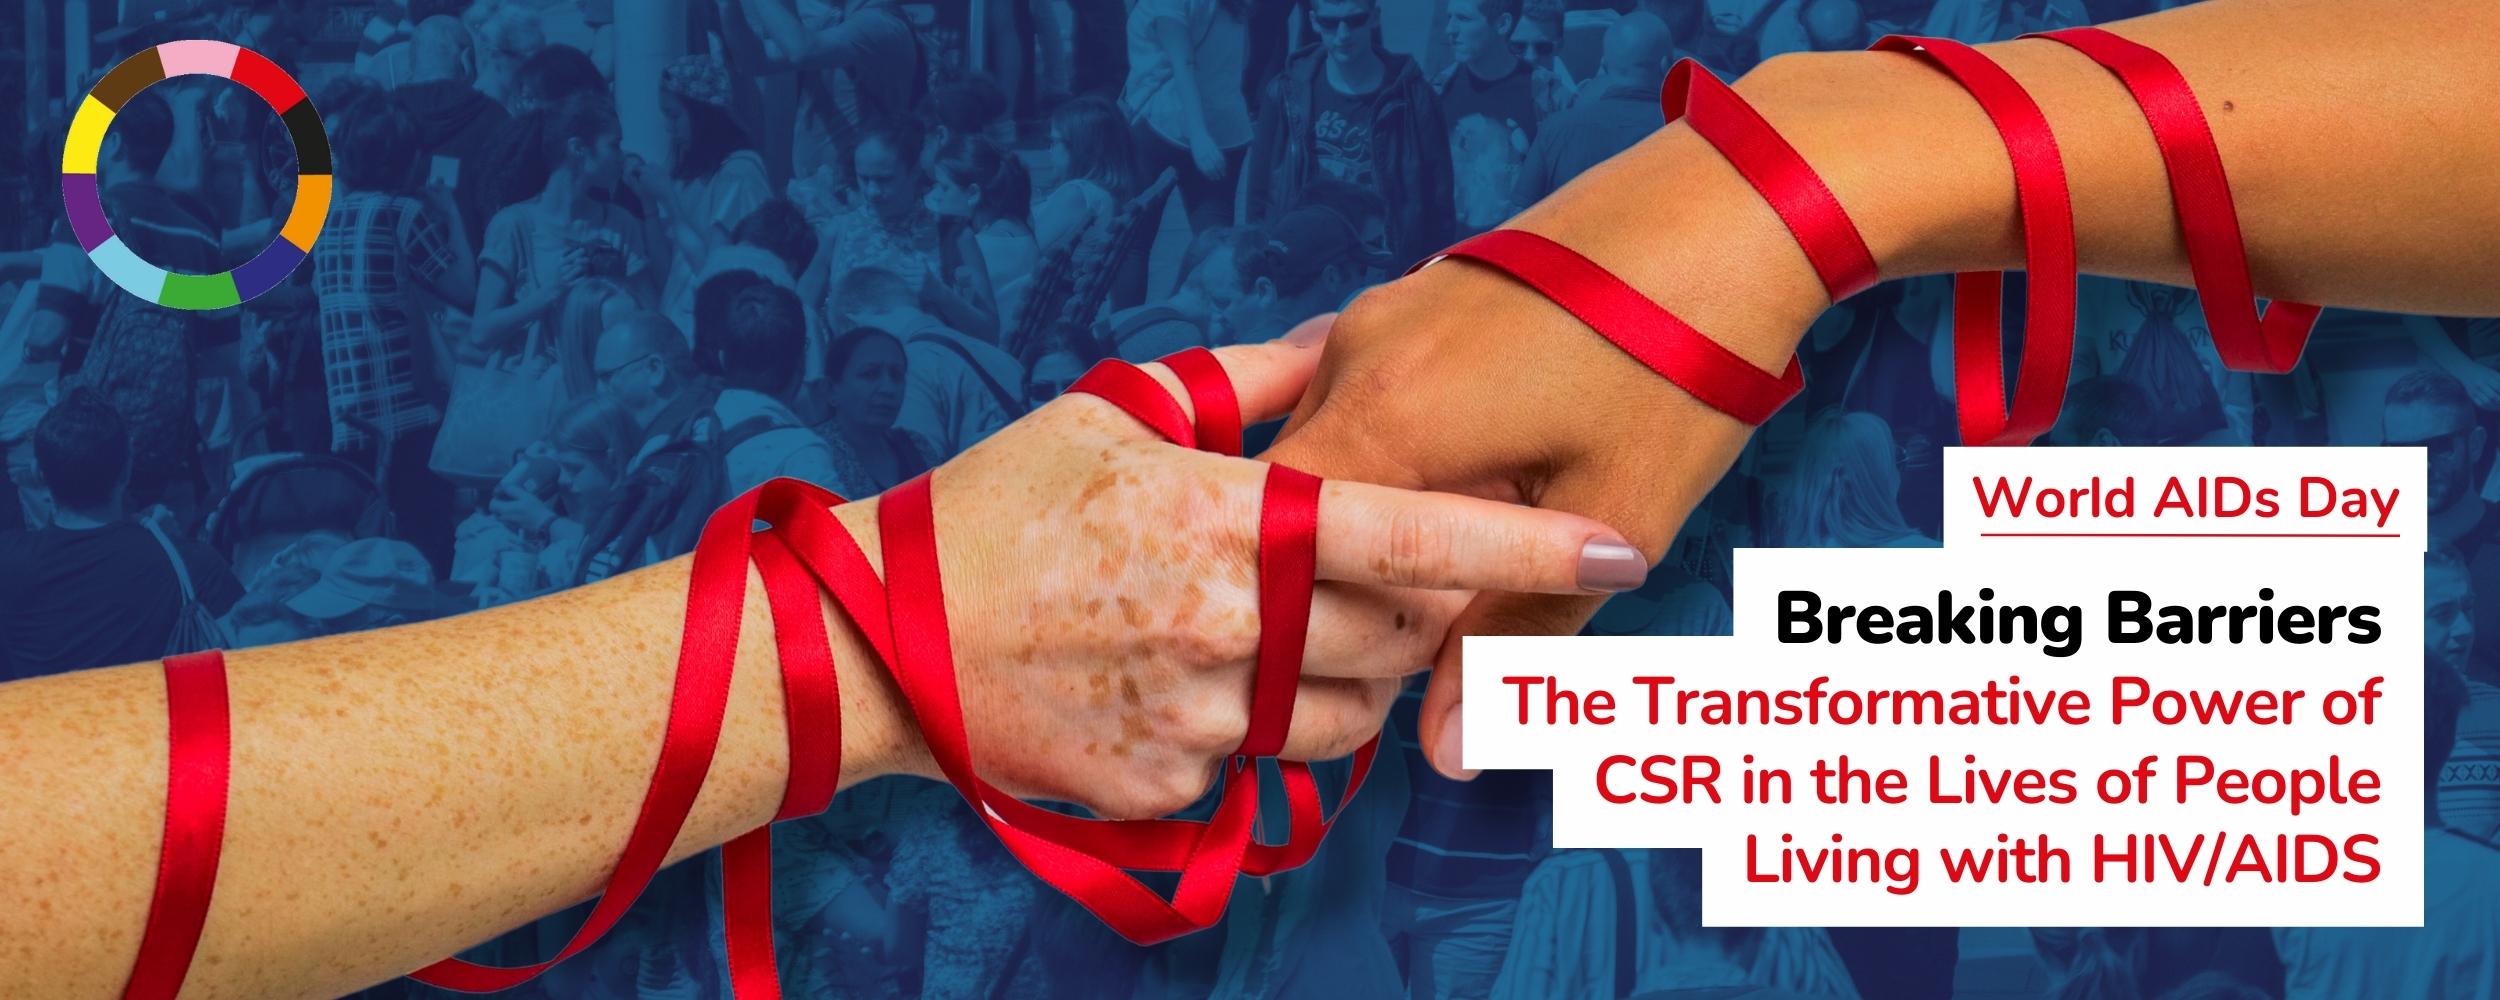 World AIDs Day - Breaking Barriers The Transformative Power of CSR in the Lives of People Living with HIV/AIDS